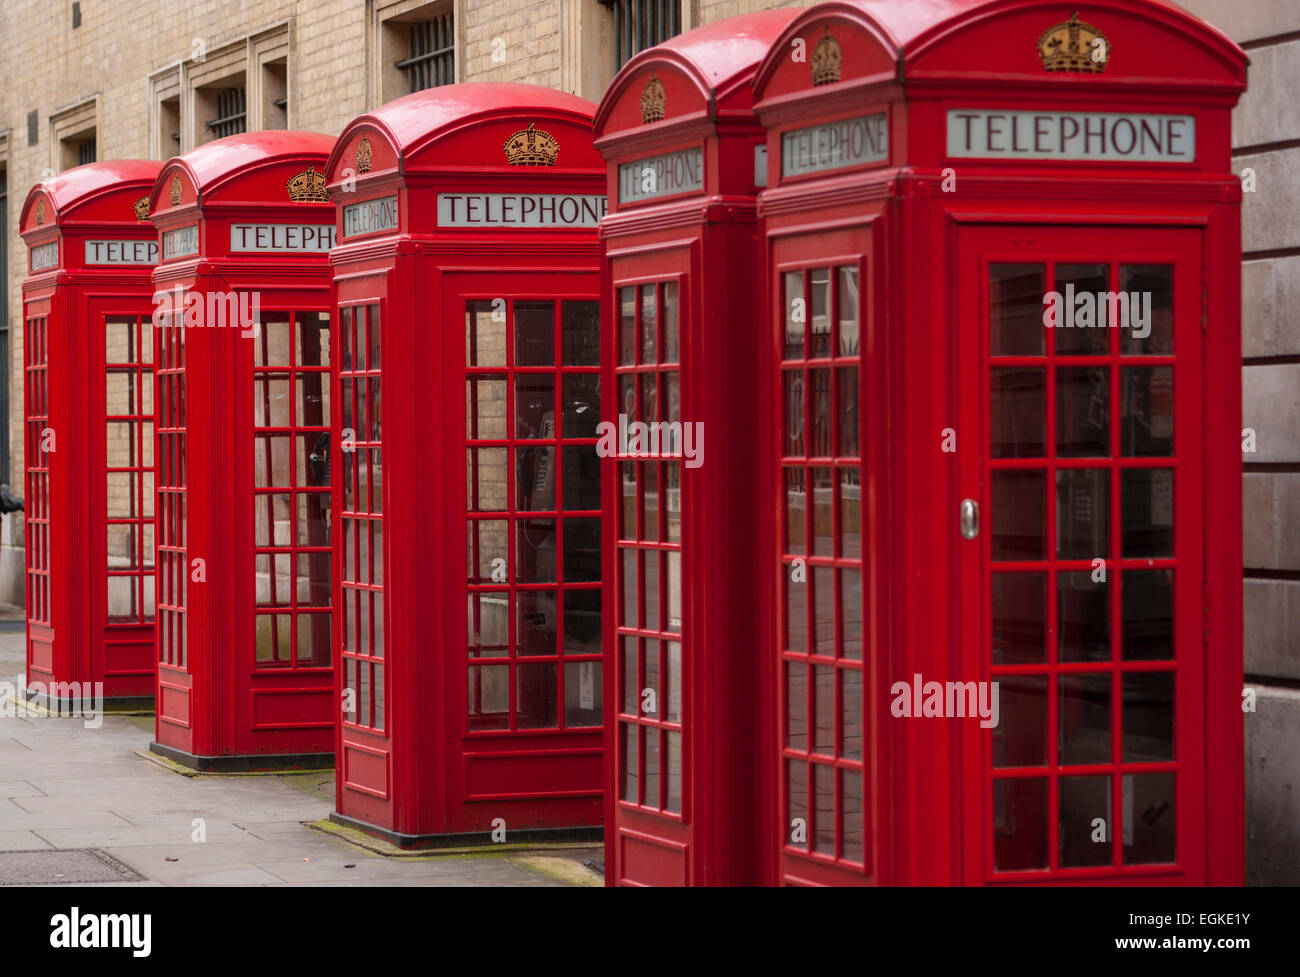 Row of red phoneboxes in Broad court, Drury lane Bow Street London Stock Photo